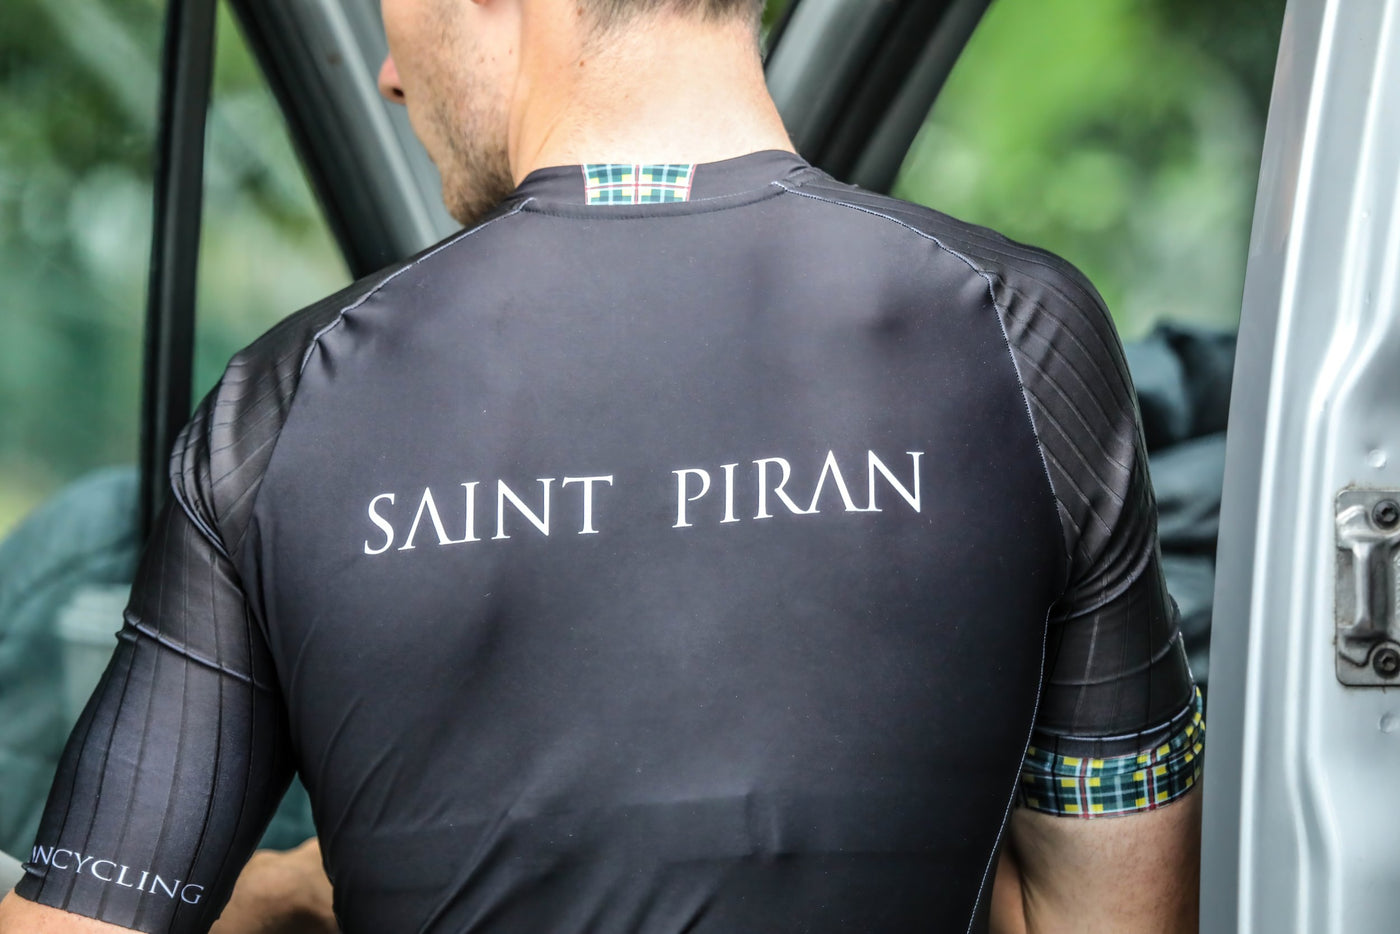 A JERSEY IS NOT JUST A JERSEY. UNVEILING THE STORY BEHIND SAINT PIRAN X BIORACER JERSEYS WITH TEAM OWNER RICHARD PASCOE